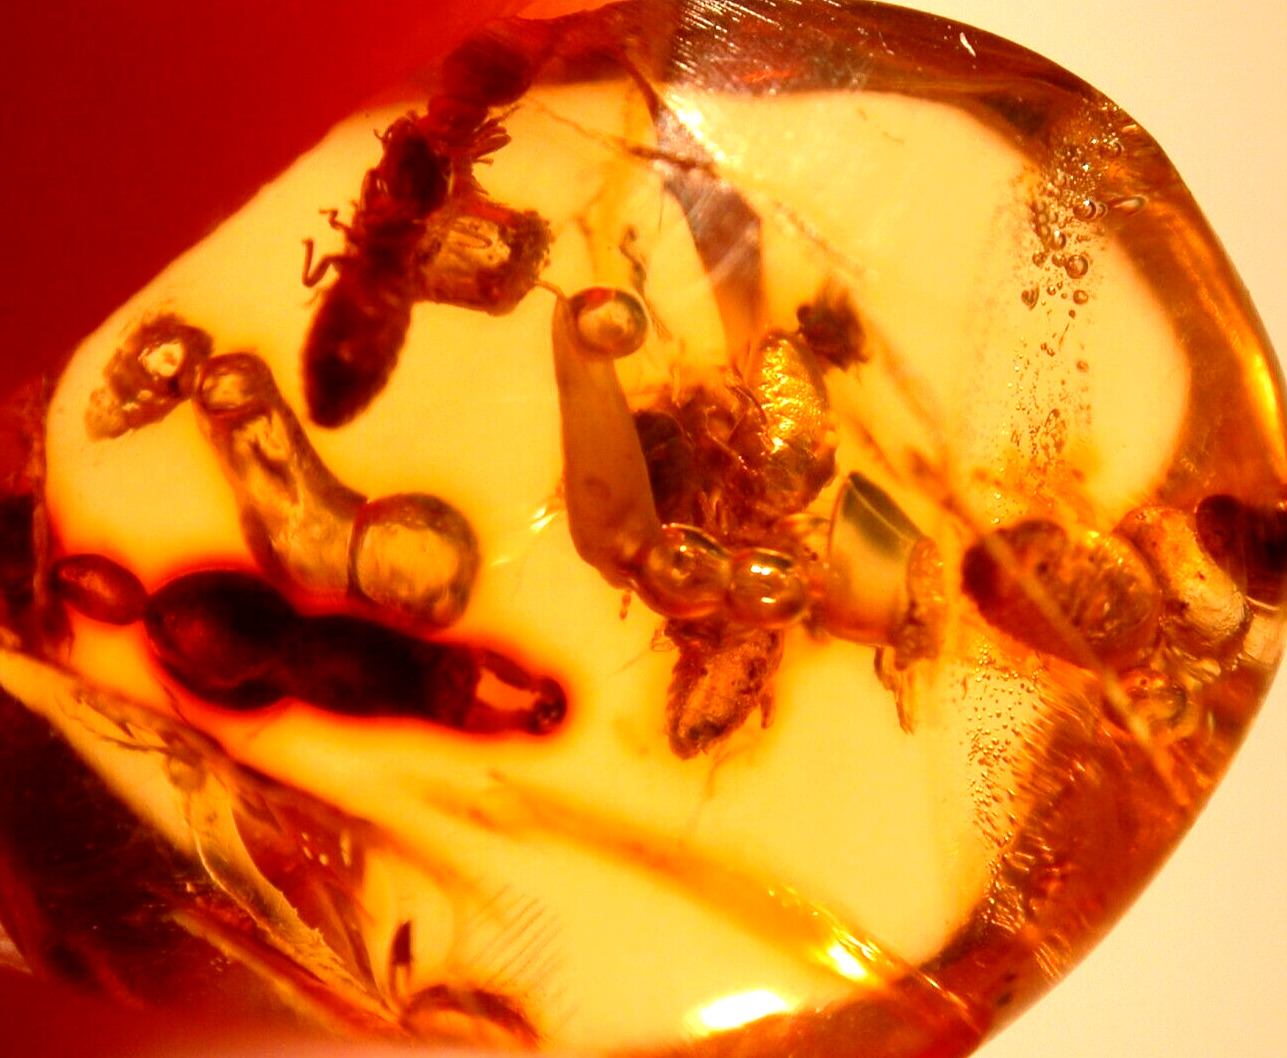 3 Worker Termites with Methane Bubbles in Dominican Amber Fossil Gemstone